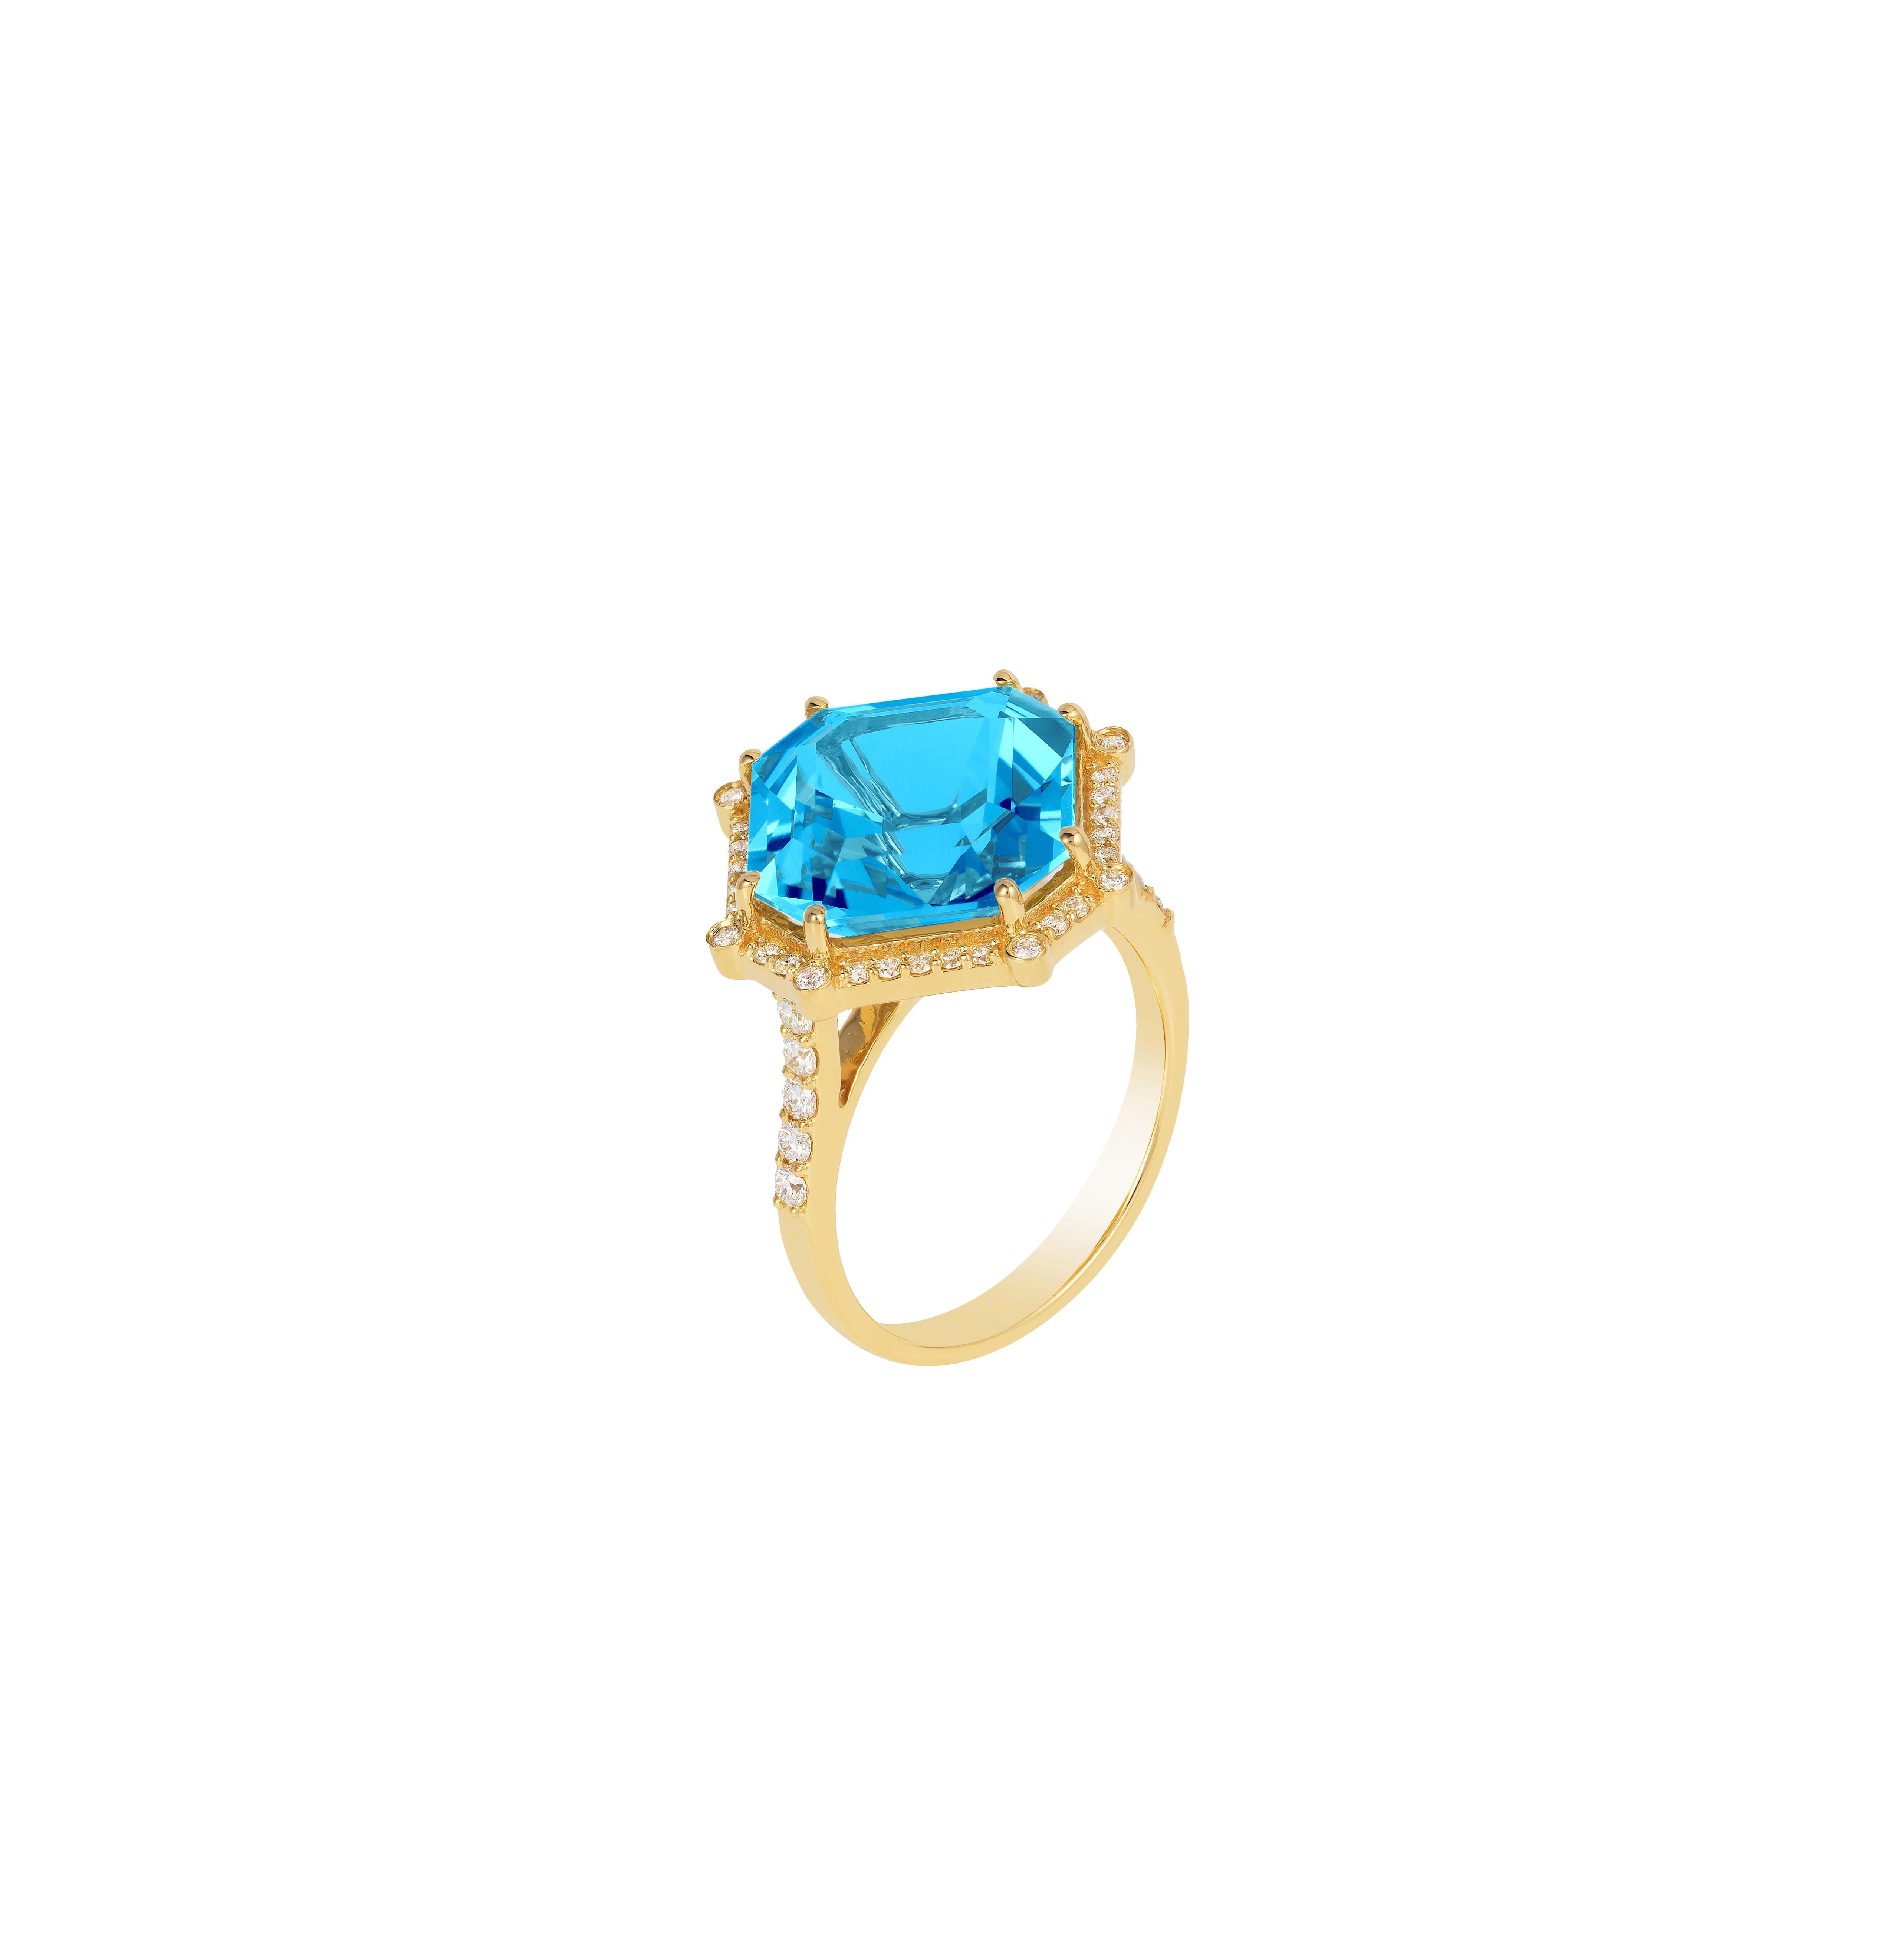 Blue Topaz Octagon Ring in 18K Yellow Gold with Diamonds from 'Gossip' Collection
 Stone Size: 9 x 9 mm
 Diamonds: G-H / VS, Approx Wt: 0.20 Cts